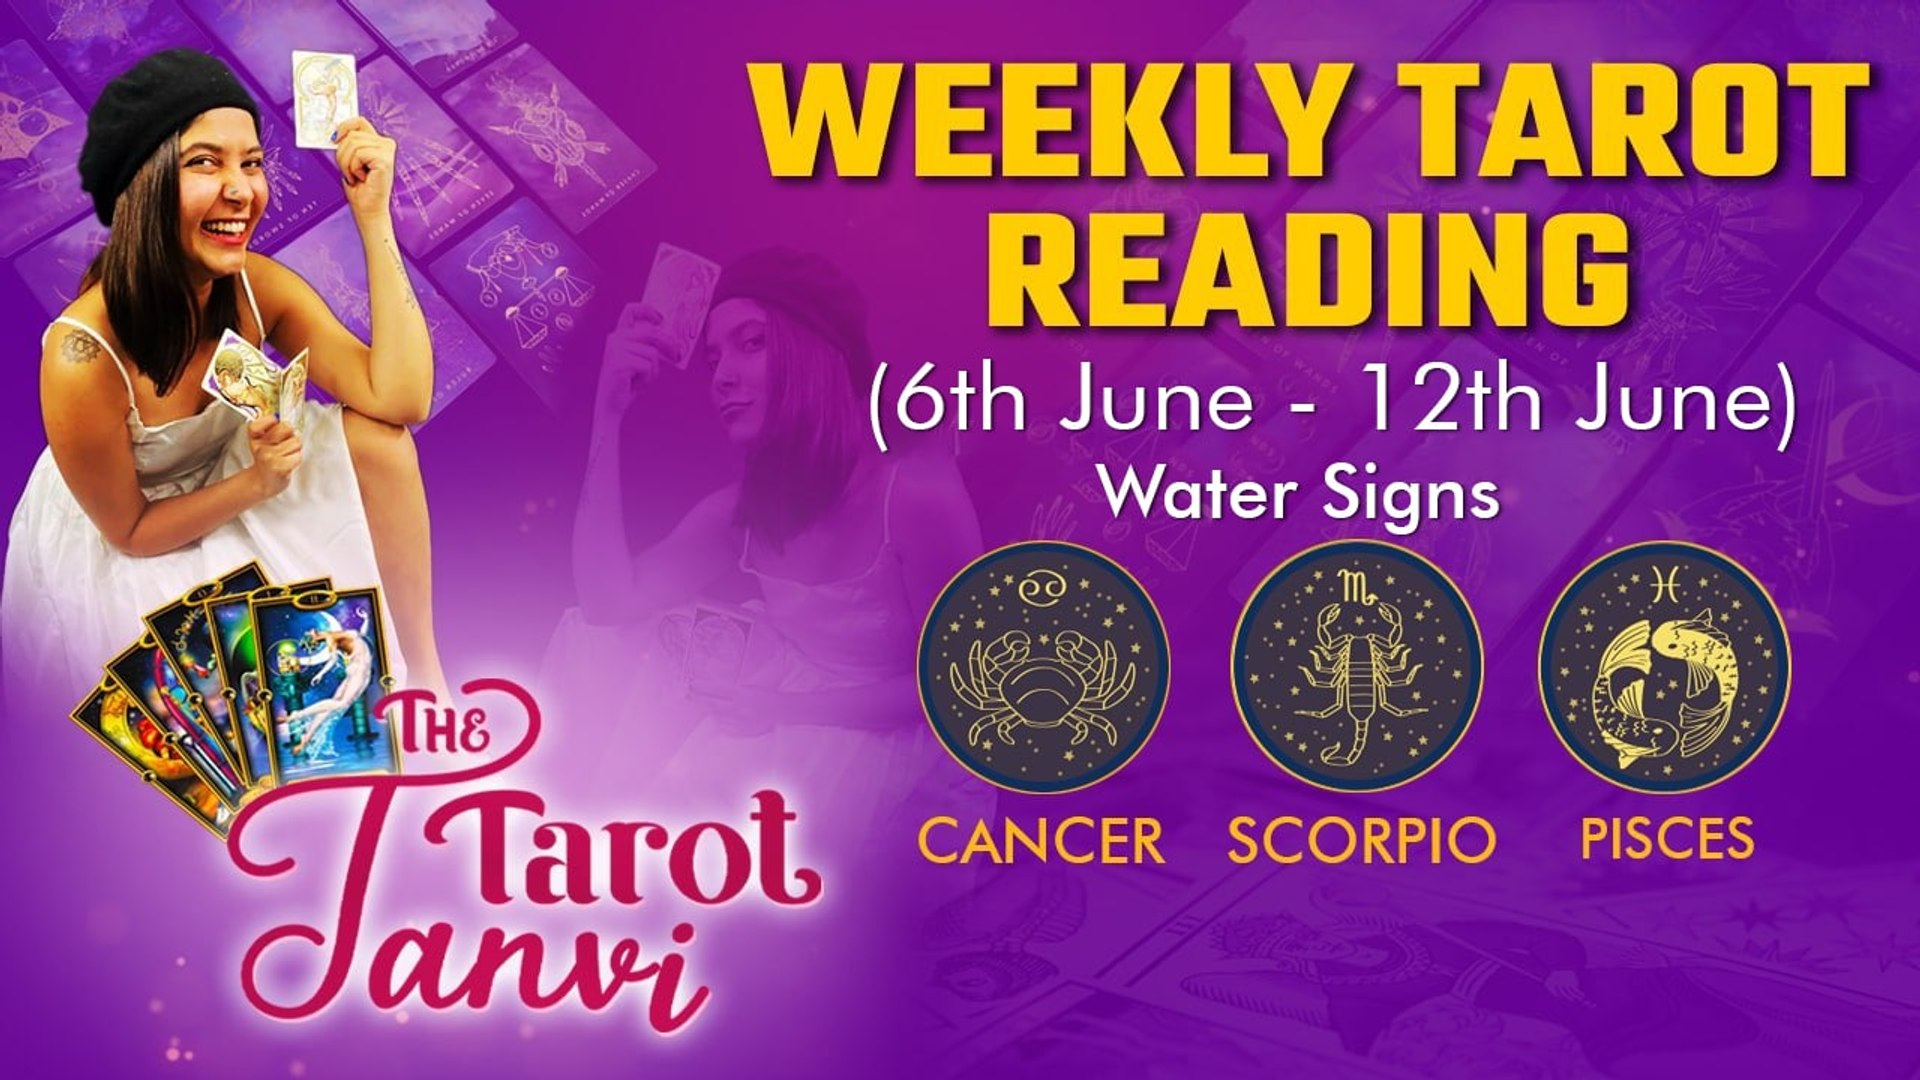 Cancer, Scorpio, and Pisces - Weekly Tarot Reading: 6th June - 12th June 2022 - Oneindia video Dailymotion